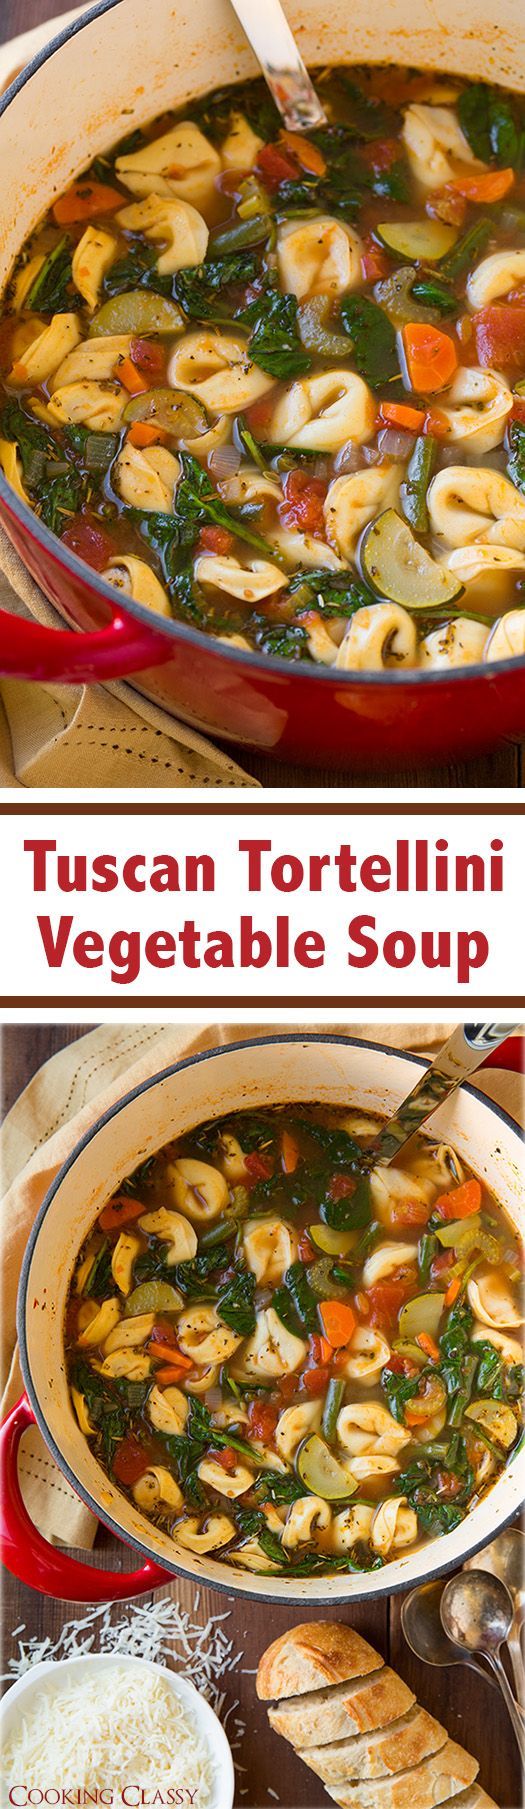 Tuscan Tortellini Vegetable Soup – this soup is easy to make and it tastes AMAZING! Like minestrone but with tortellini instead of